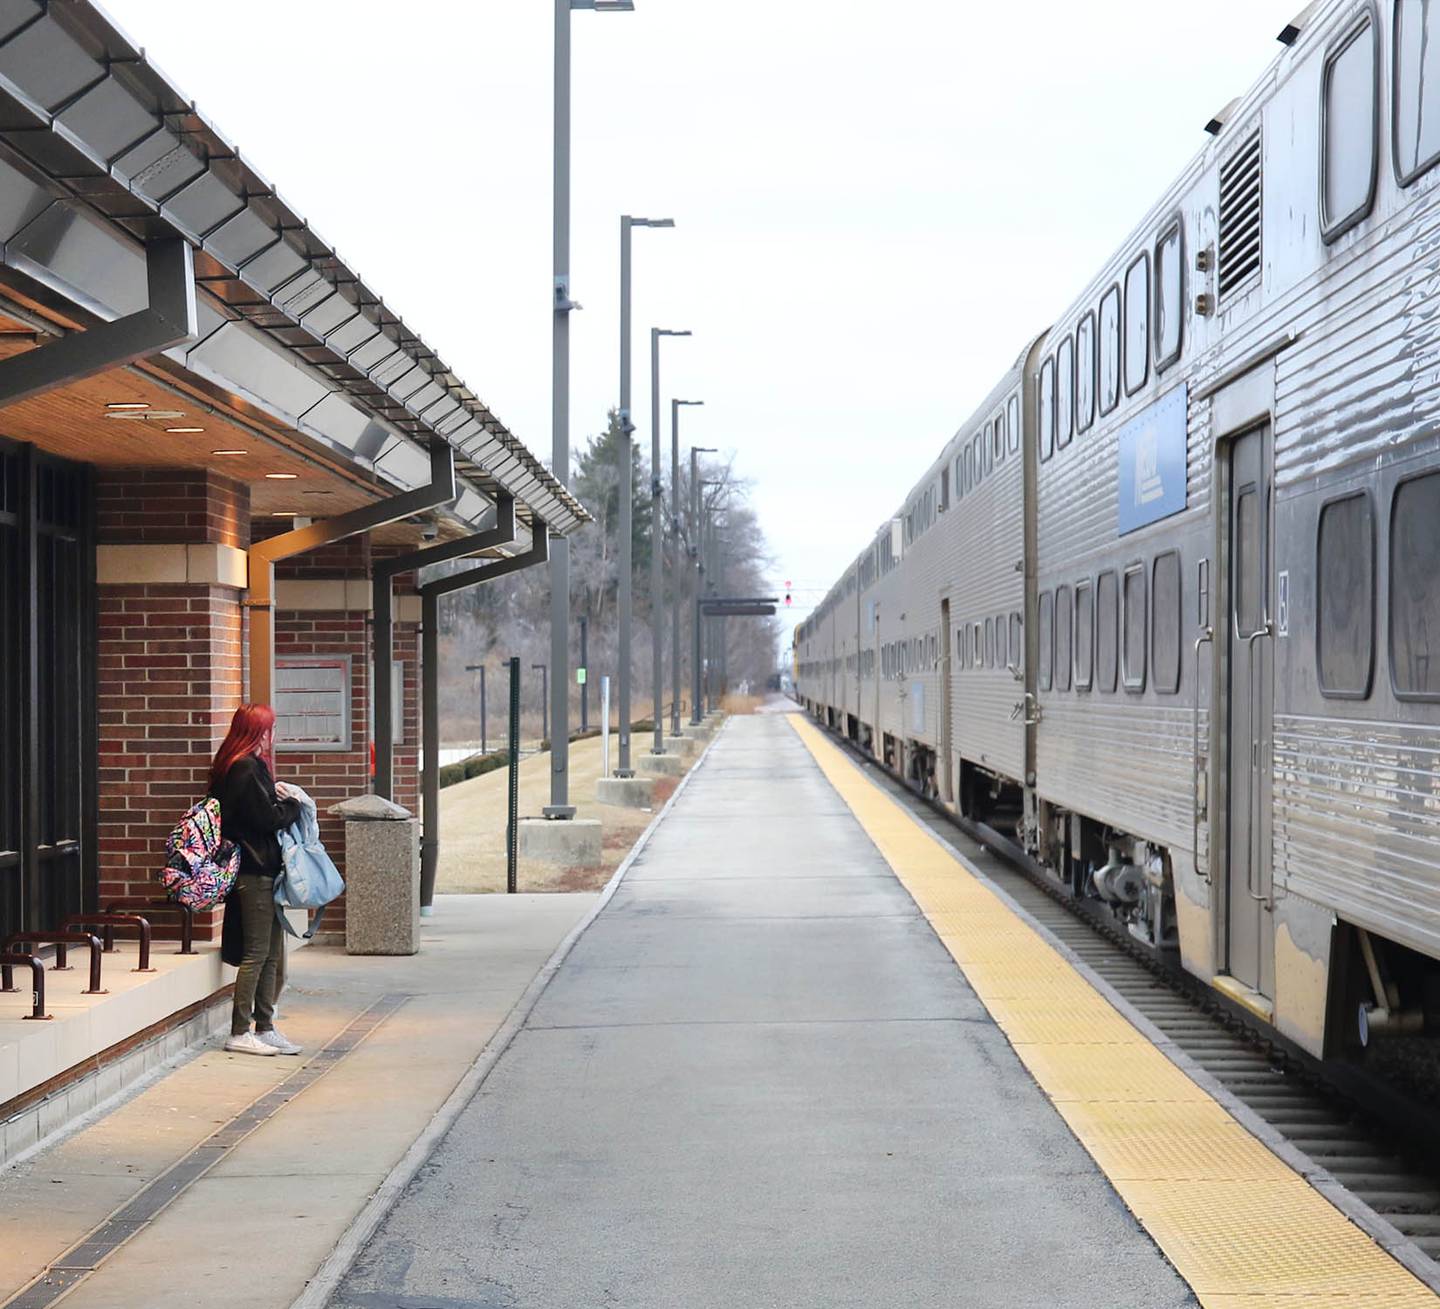 A commuter waits to board the train Thursday, Jan. 12, 2023, at the Elburn Metra Station.